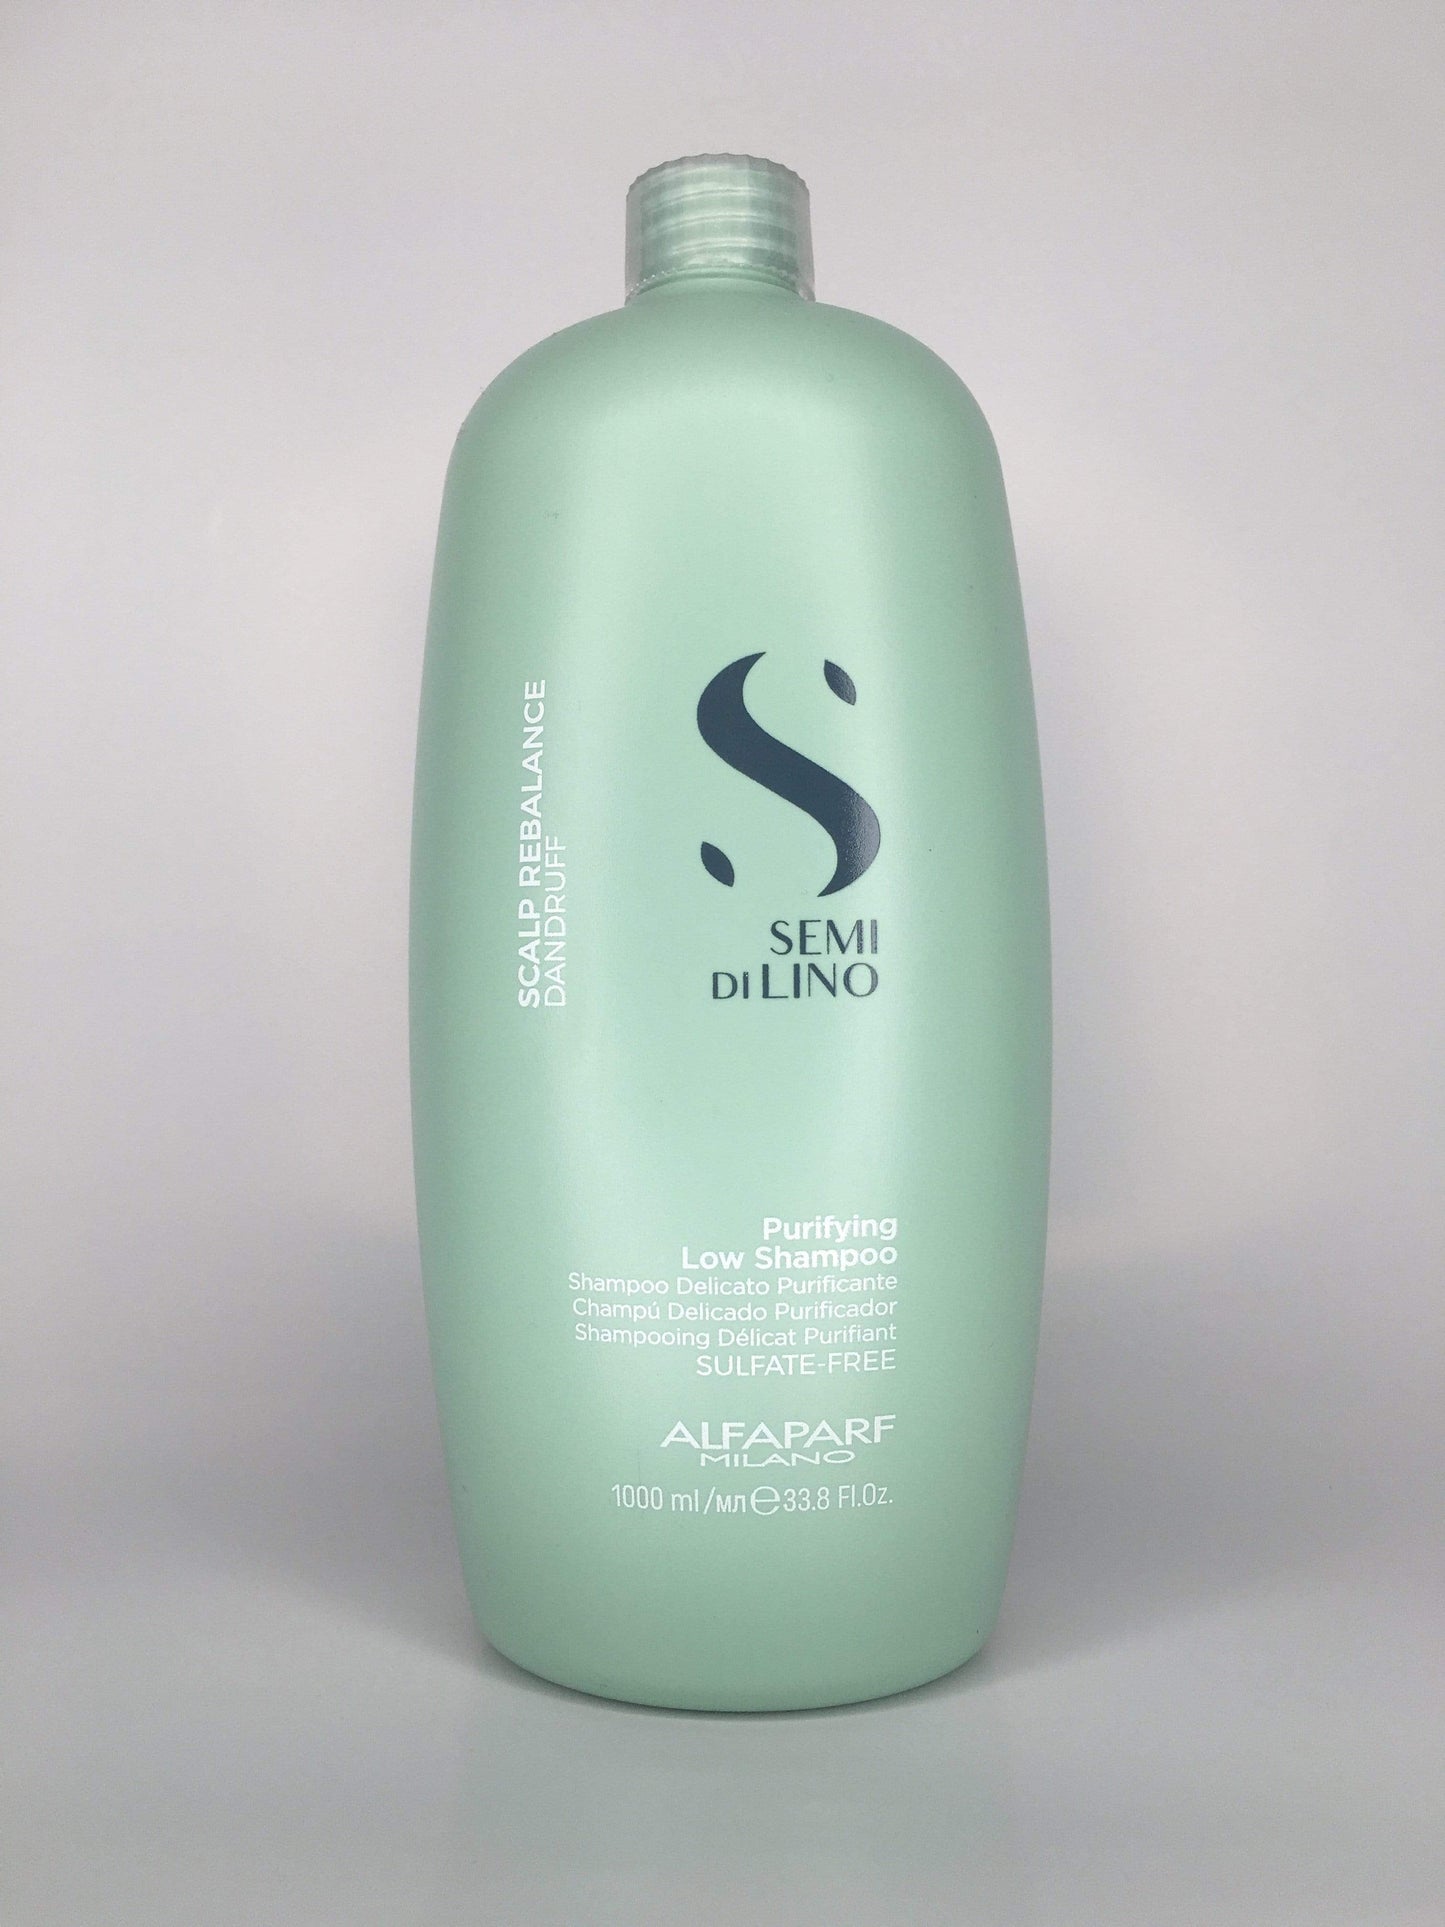 Scalp Rebalance Dandruff Purifying Low Shampoo 250ML - 1LT best shampoo and conditioner for frizzy 